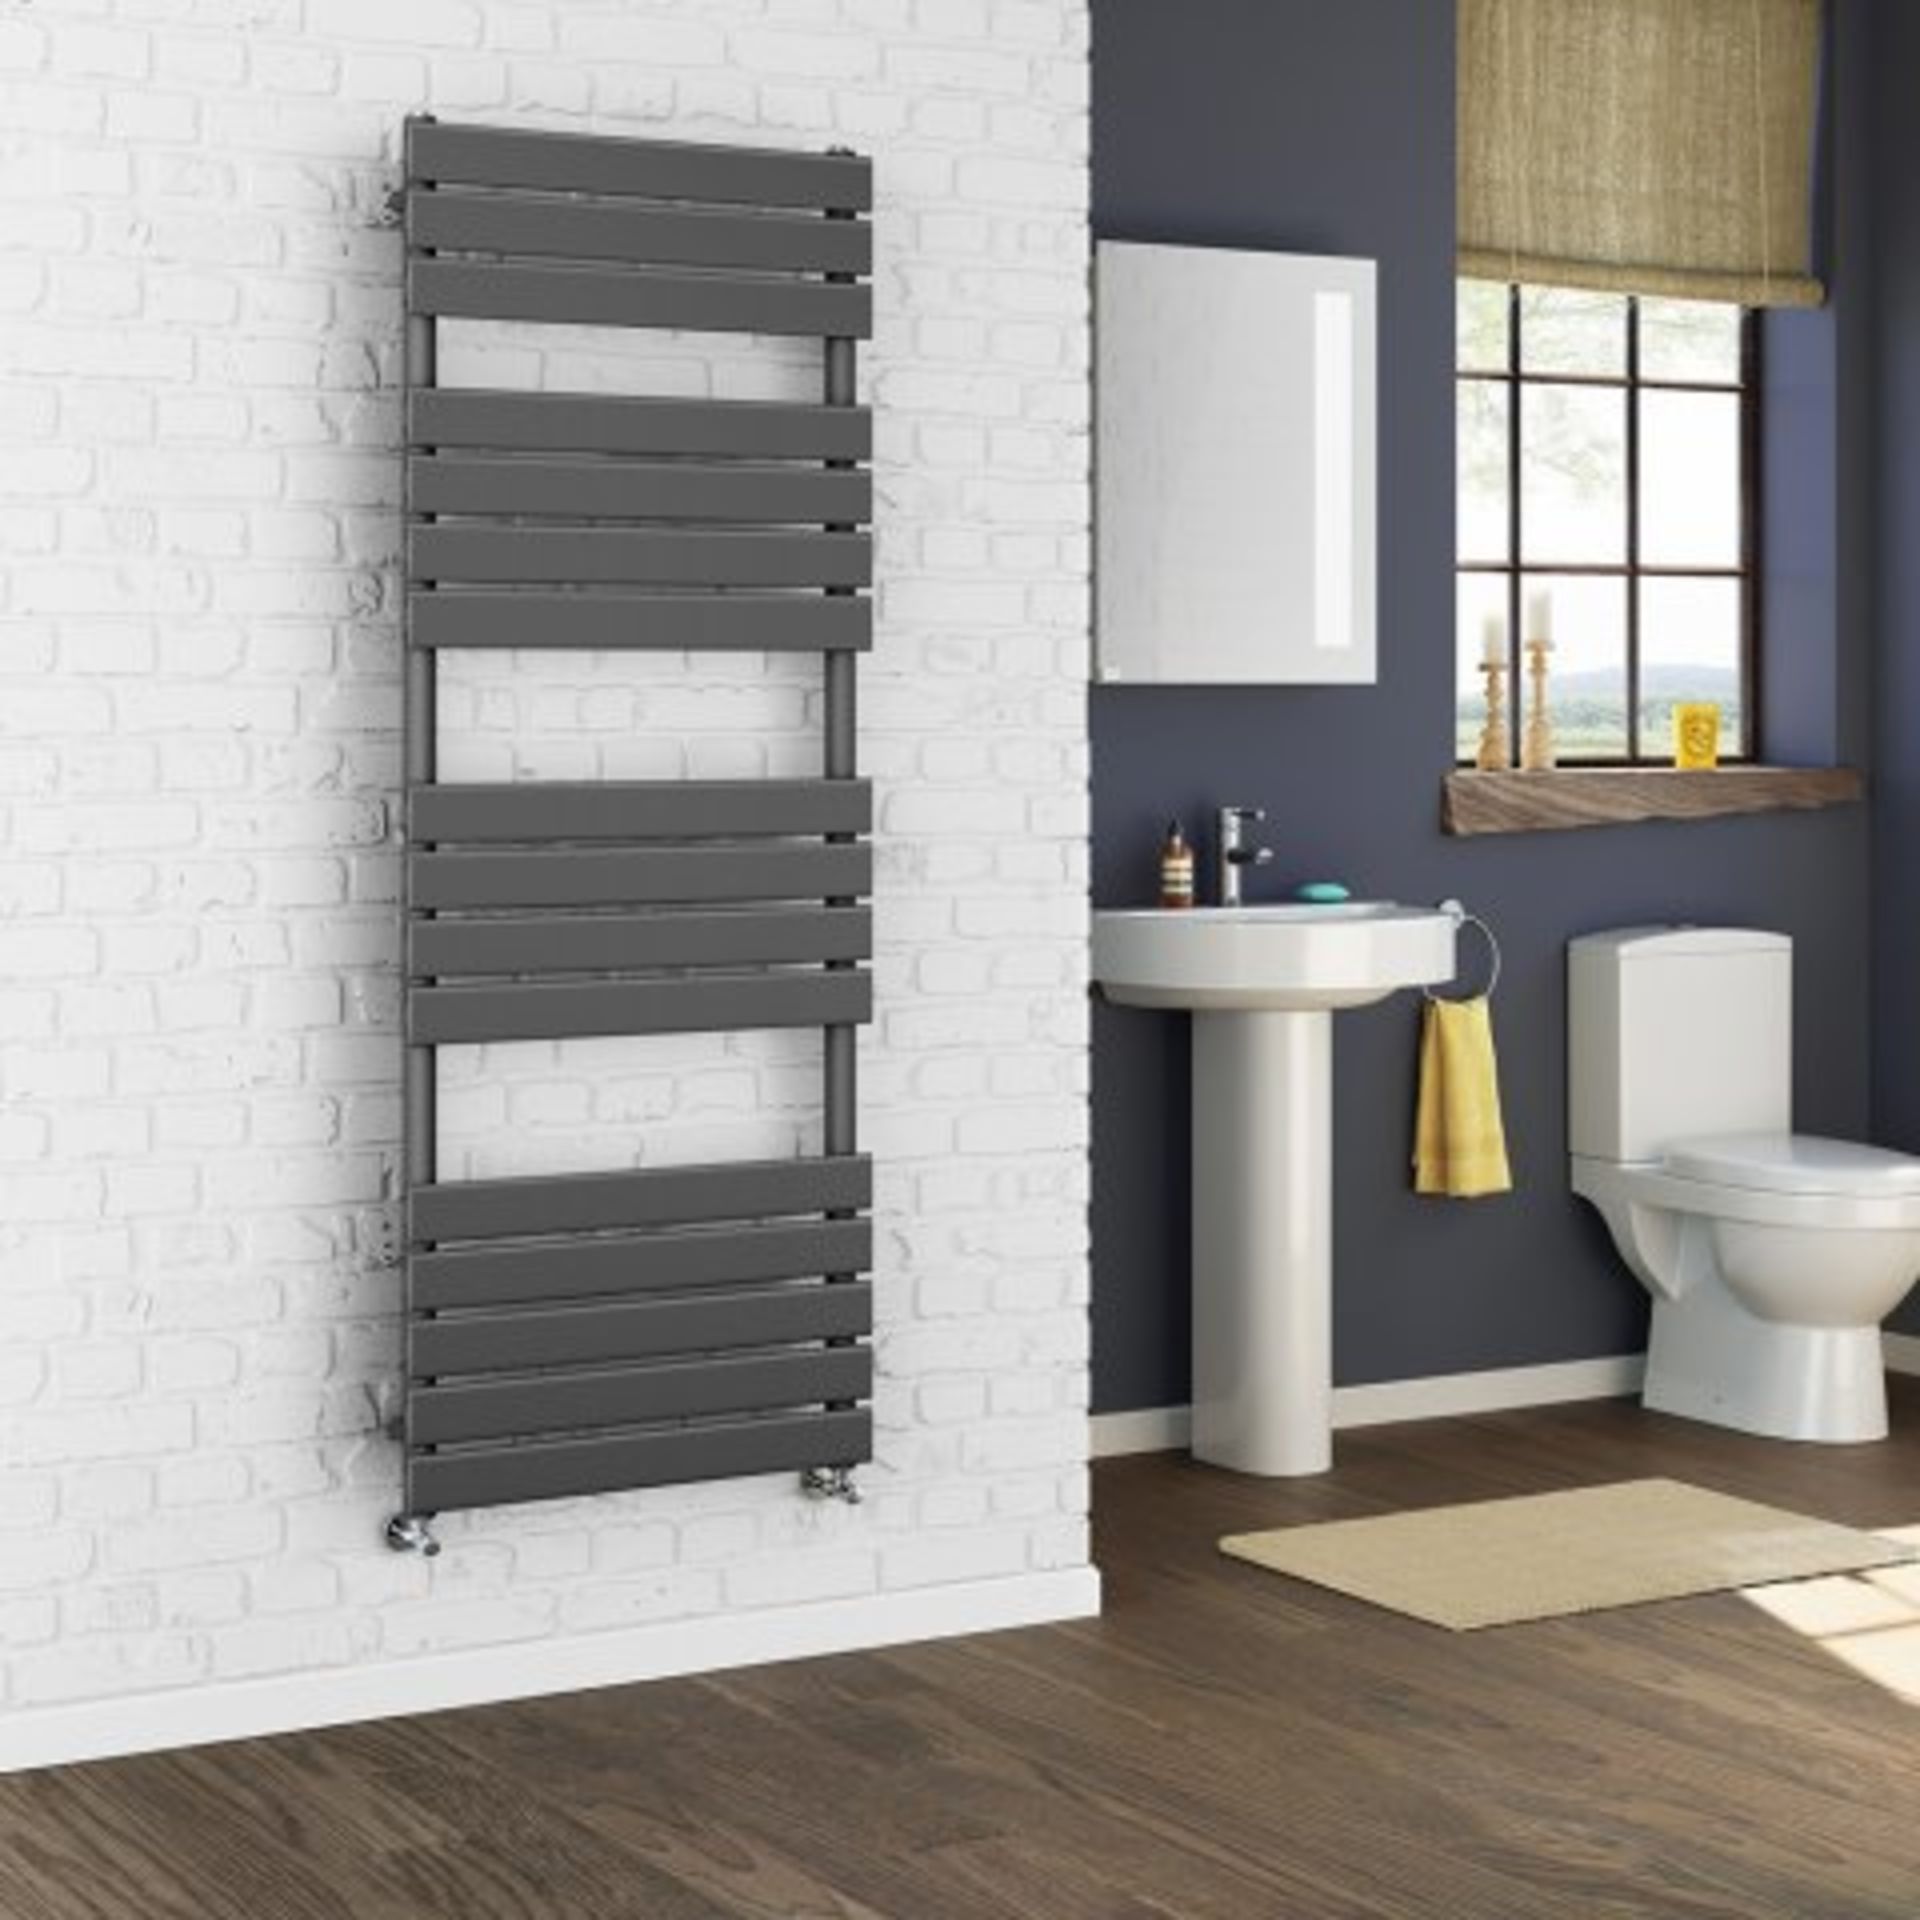 N69 - 1600x480mm Anthracite Double Oval Tube Vertical Radiator - Ember Premium. RRP £303.99. For - Image 3 of 3